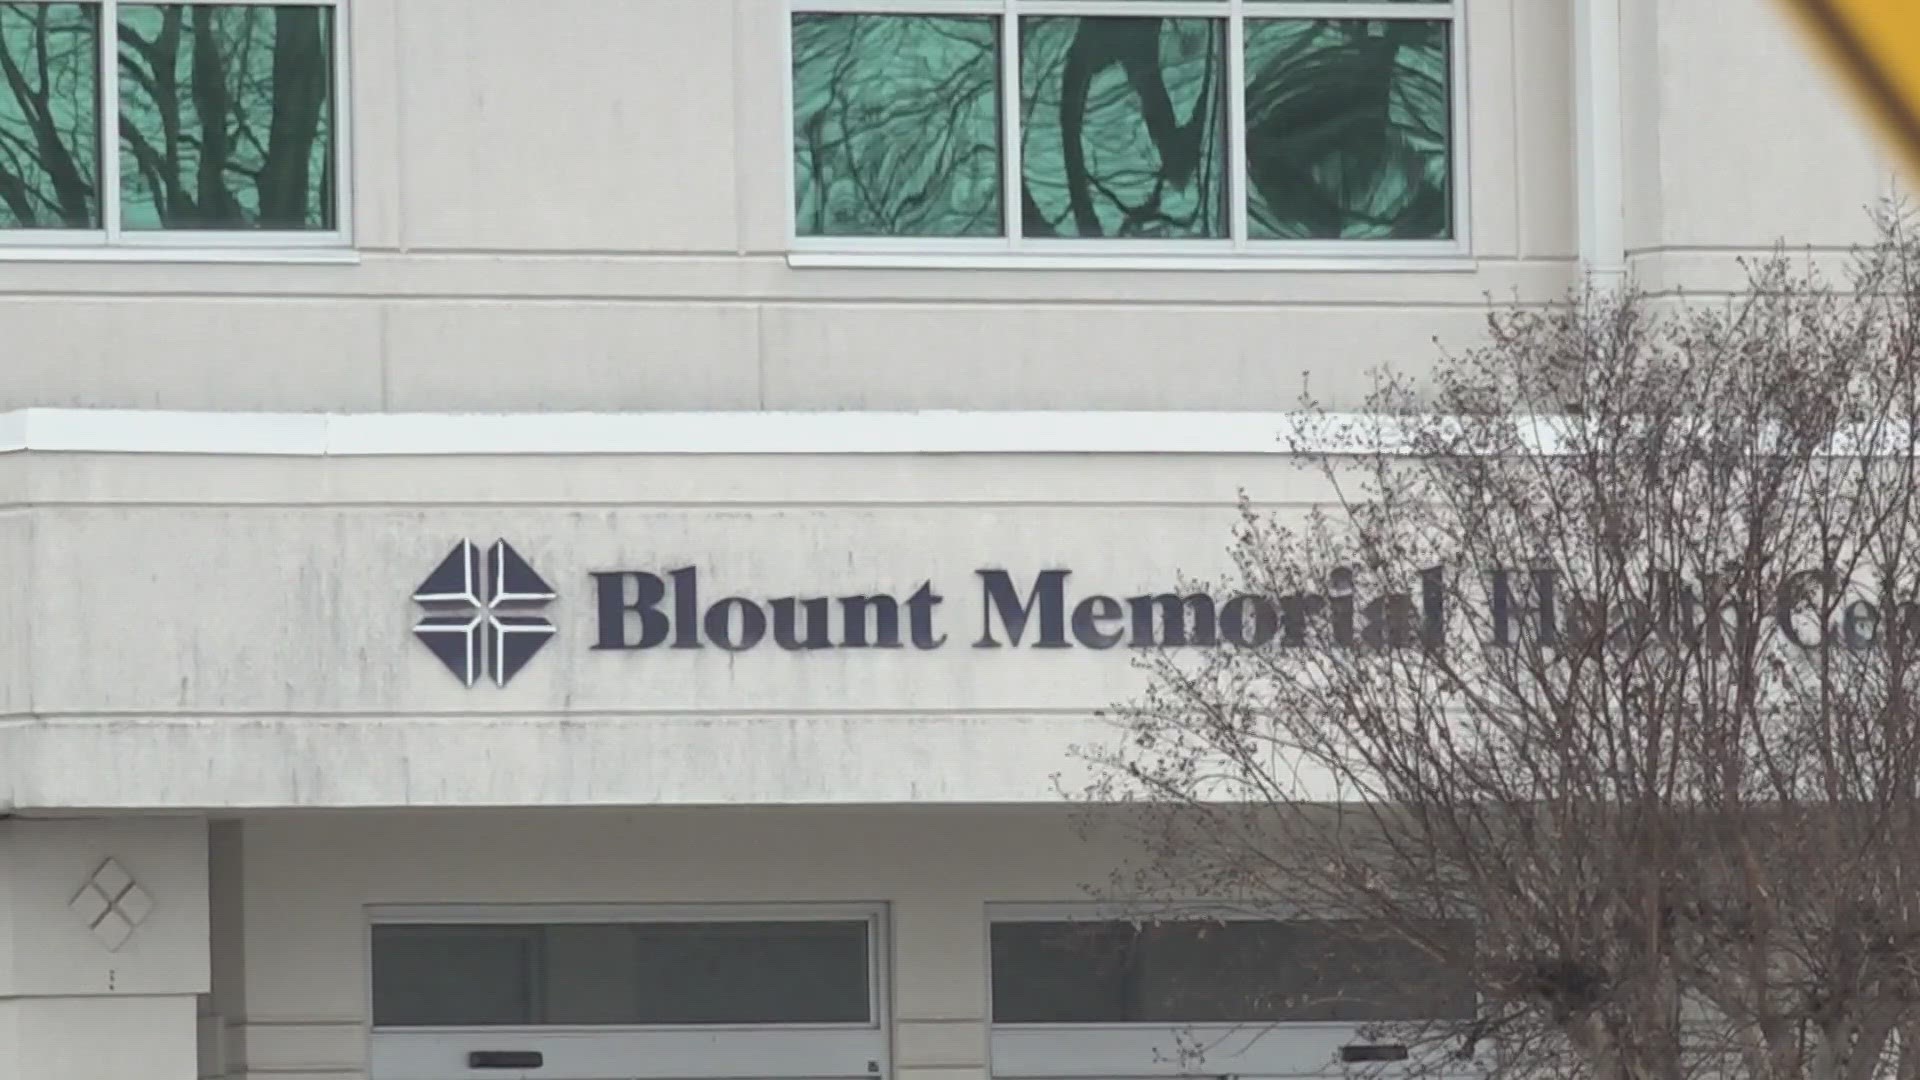 The proposal would merge the Blount Memorial Physicians Group with Covenant Health to create a joint venture separate from the hospitals.